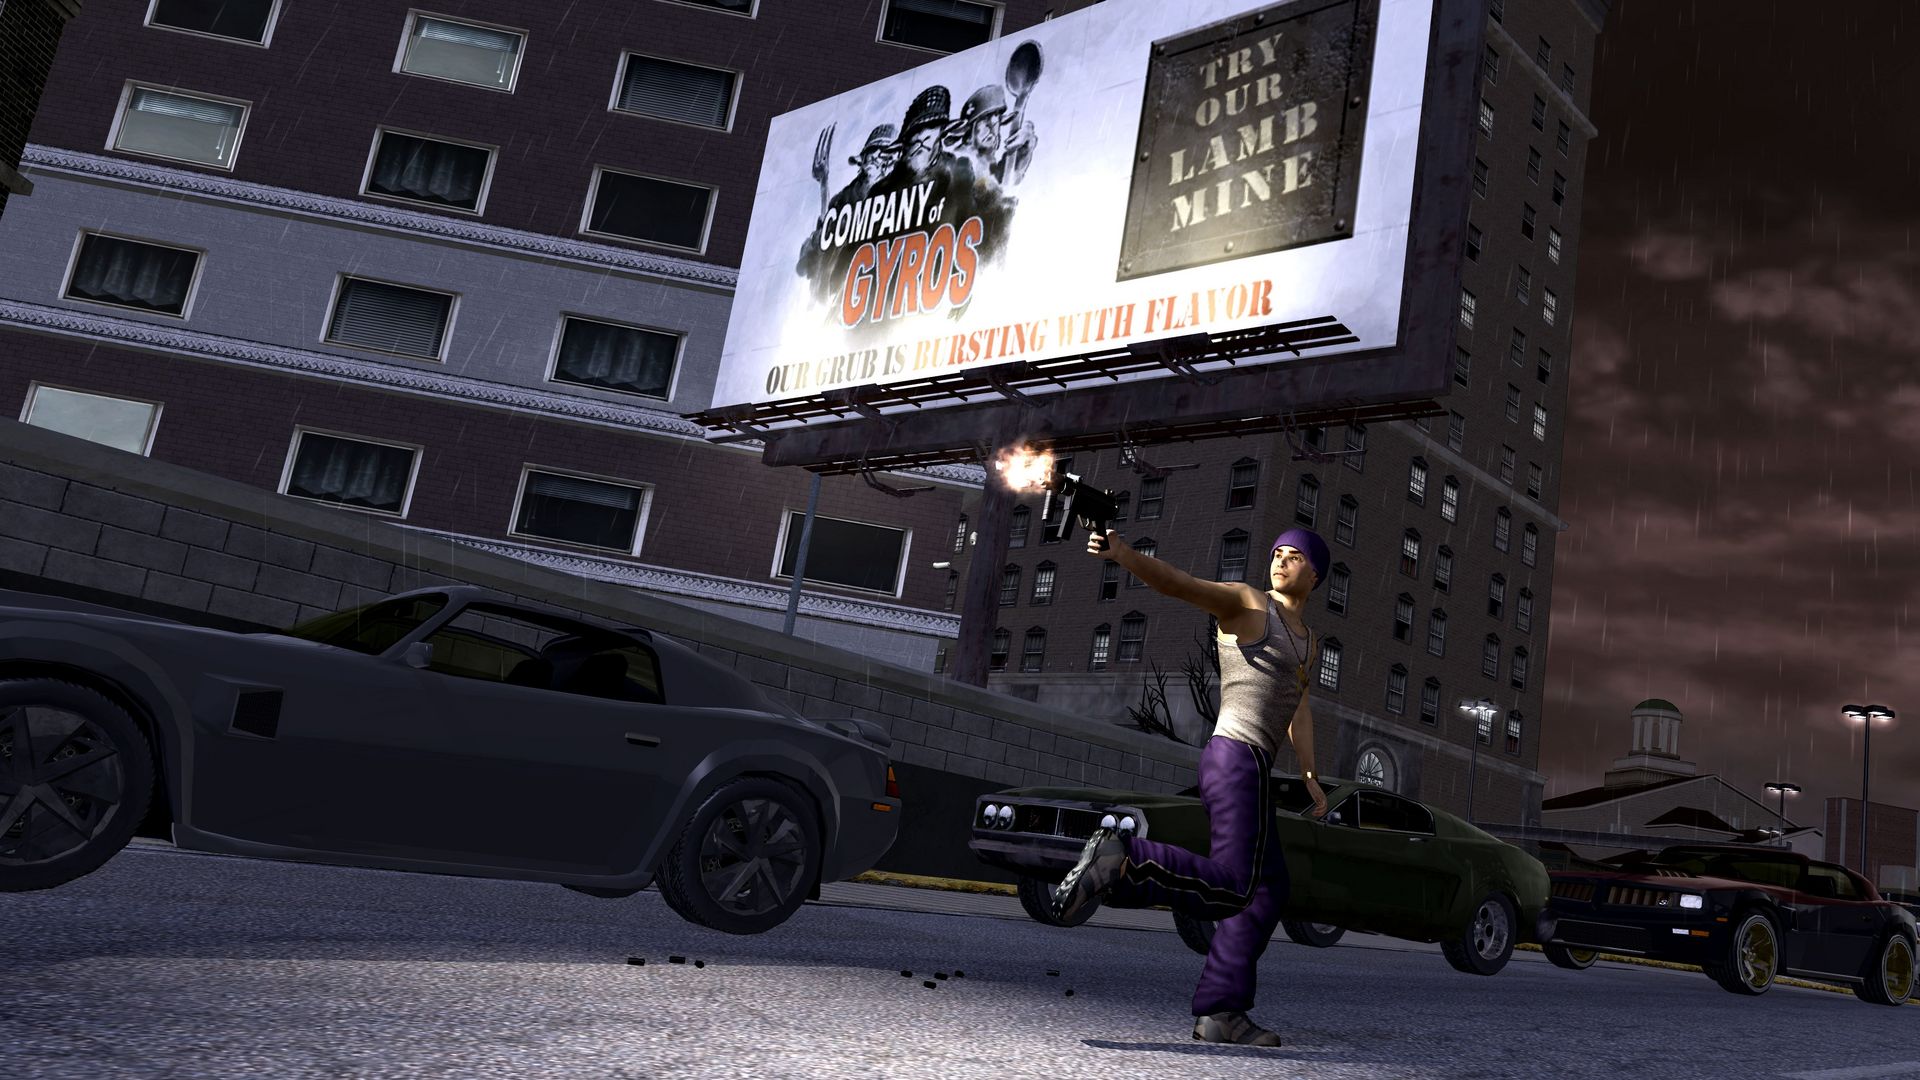 Saints Row 2 System Requirements - Can I Run It? - PCGameBenchmark